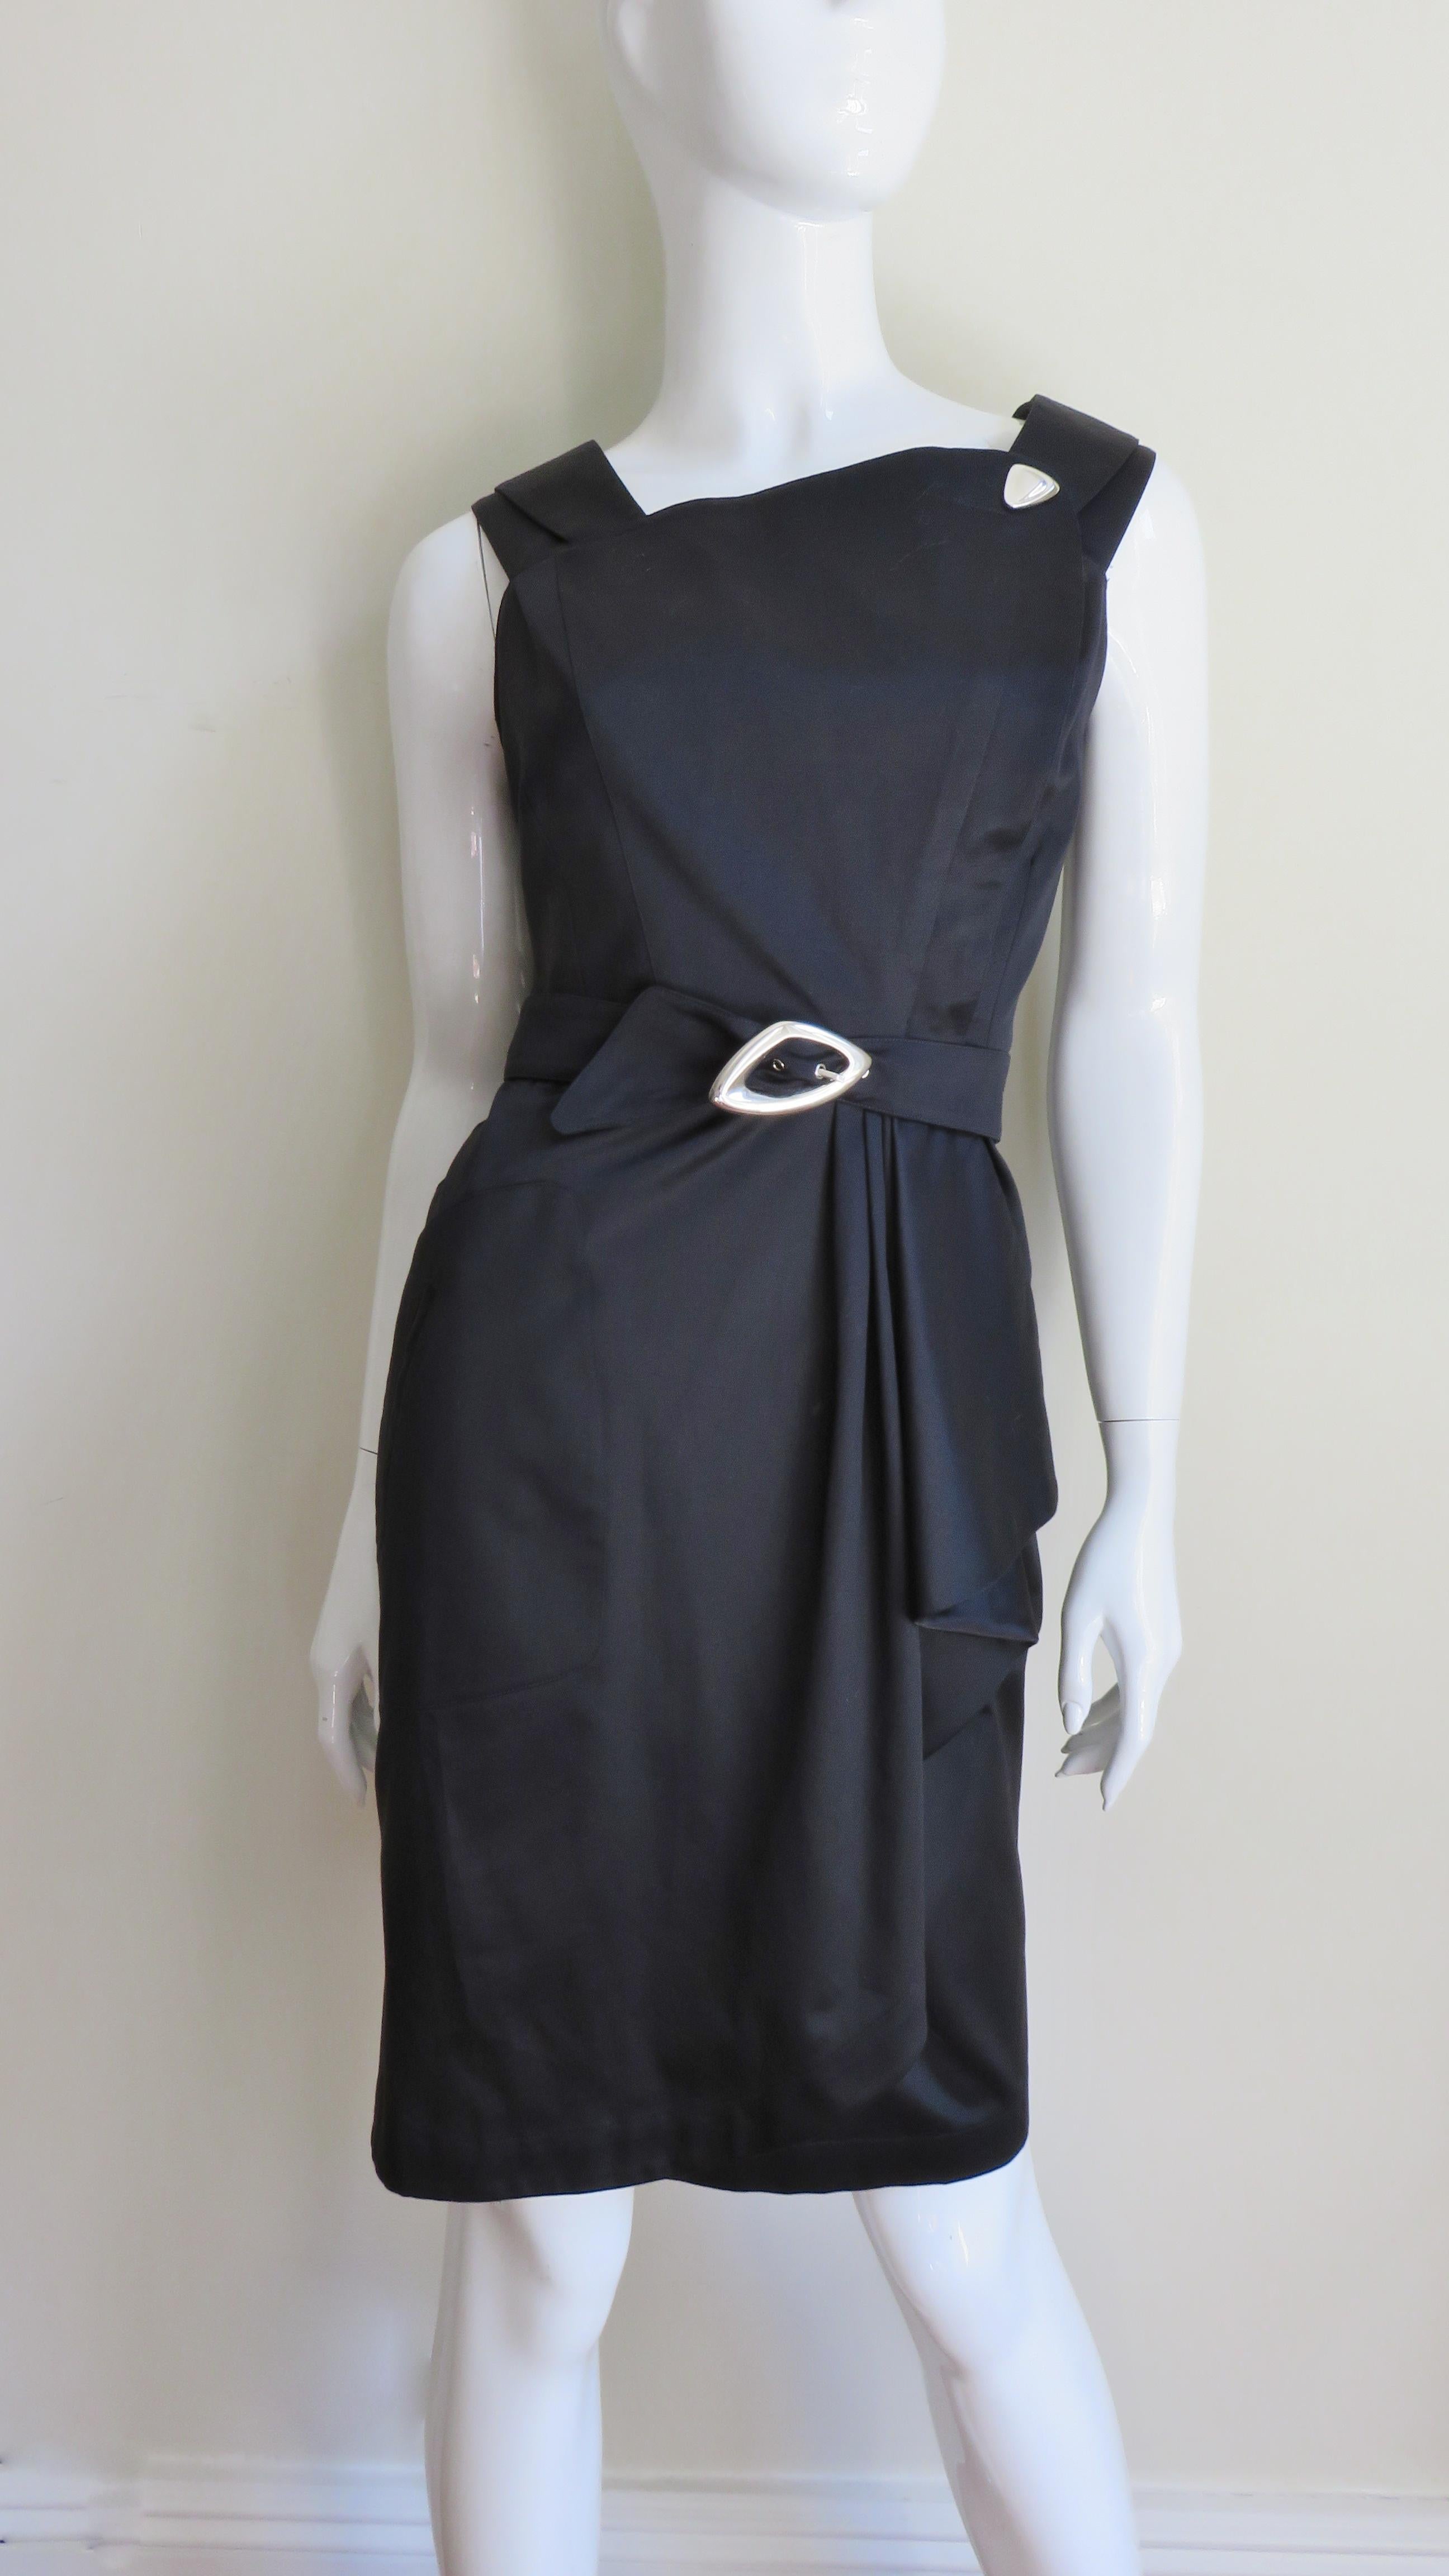 An great rich black cotton dress from Thierry Mugler.  It is sleeveless with an asymmetric neckline accented with silver hardware at one side.   It has a matching belt with a silver buckle and the wrap skirt is straight with draping at one hip. It